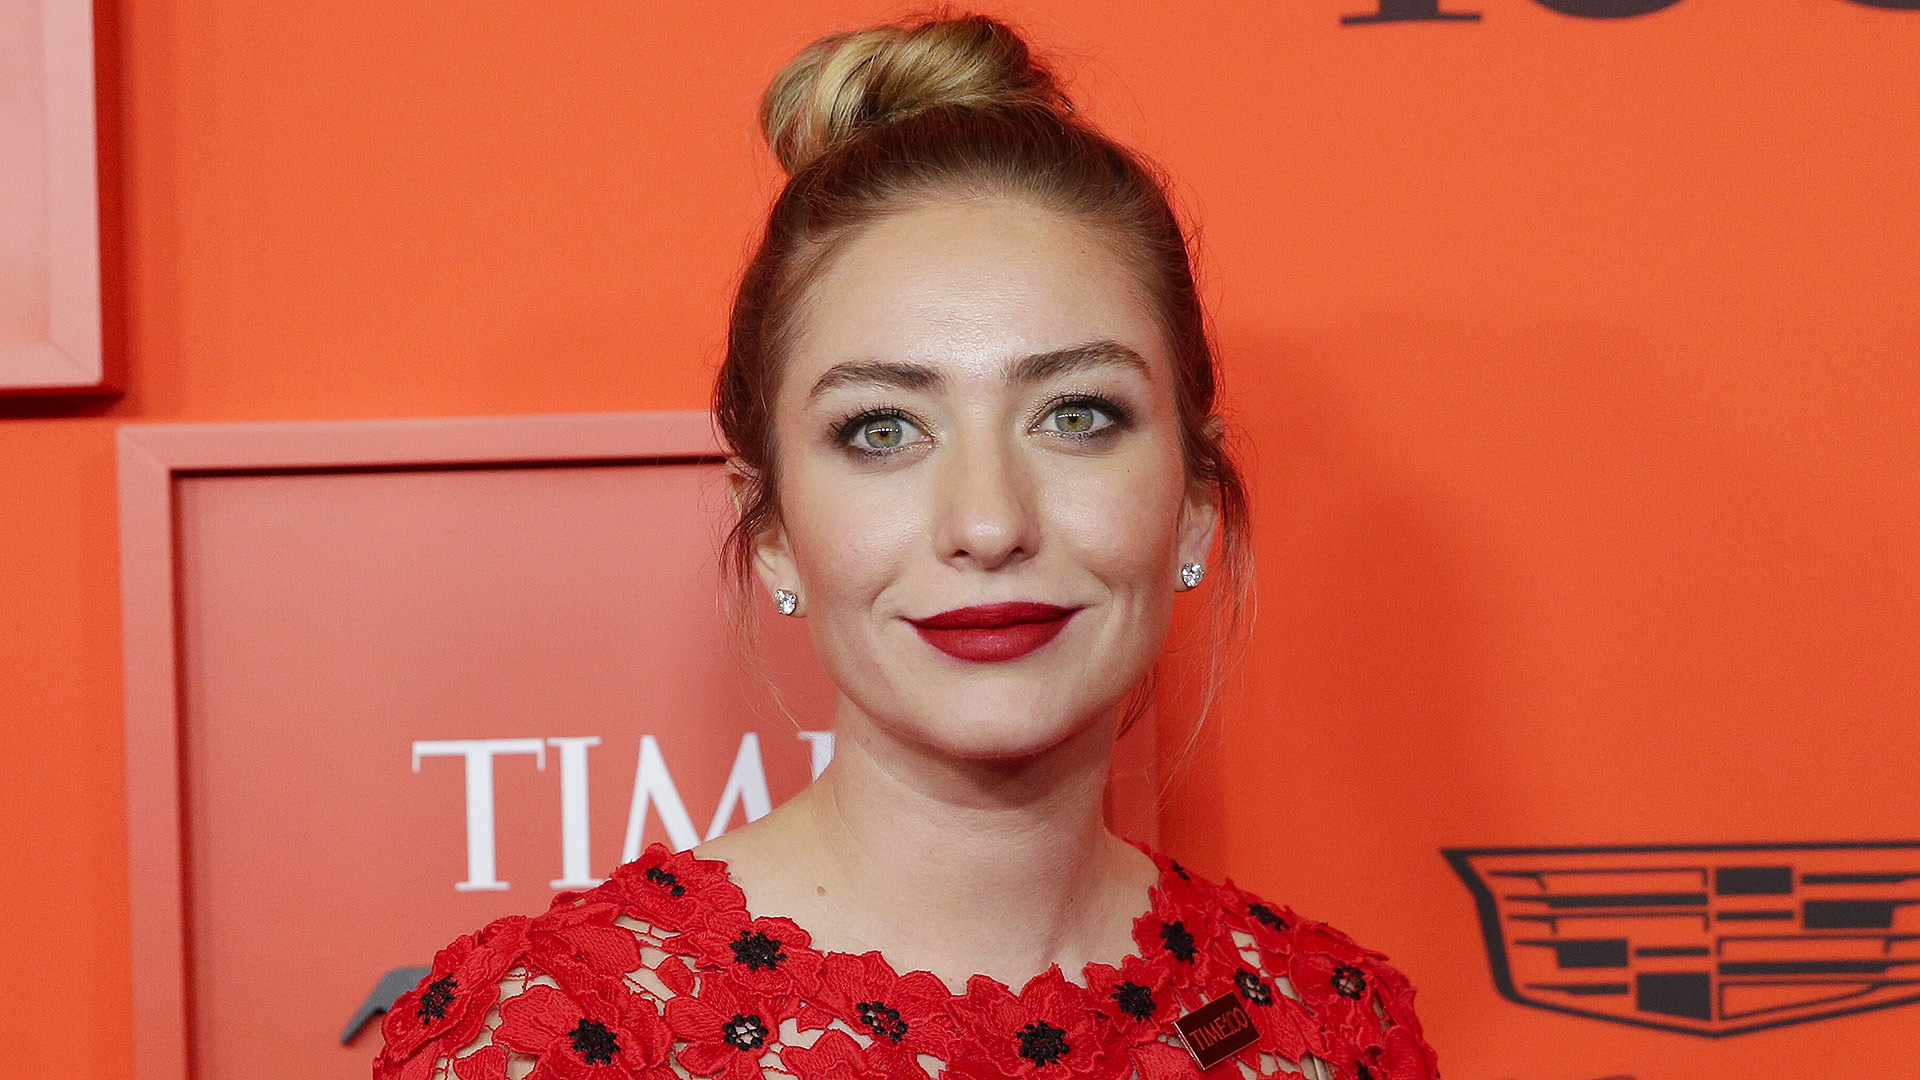 Bumble-Chefin Whitney Wolfe Herd